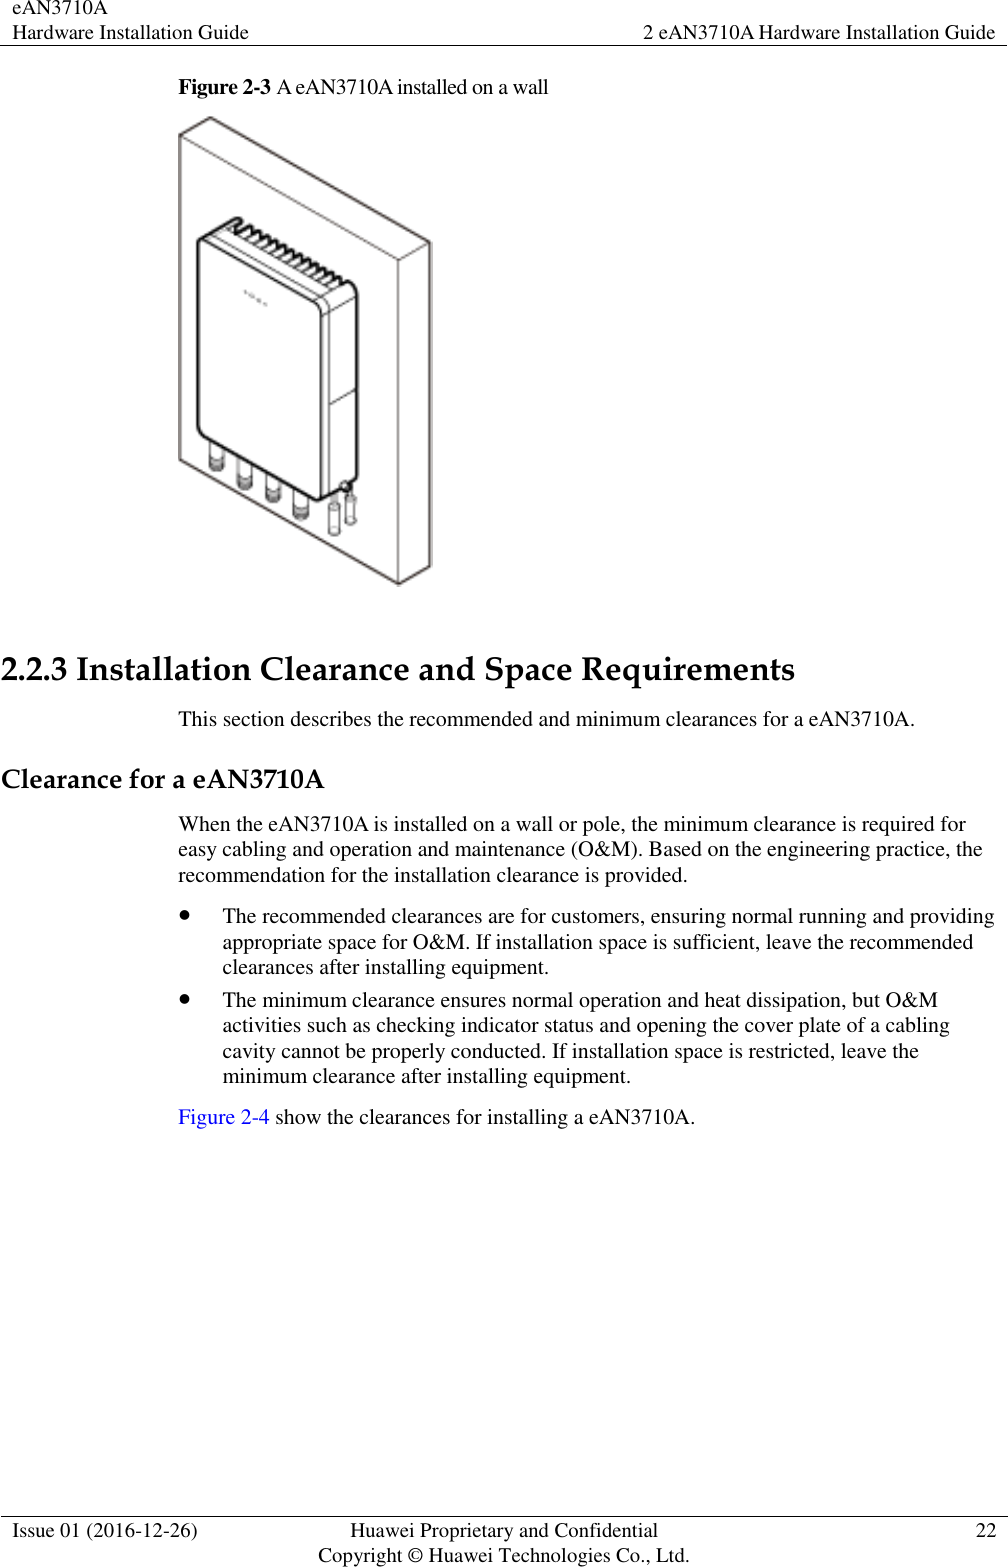 eAN3710A Hardware Installation Guide 2 eAN3710A Hardware Installation Guide  Issue 01 (2016-12-26) Huawei Proprietary and Confidential                                     Copyright © Huawei Technologies Co., Ltd. 22  Figure 2-3 A eAN3710A installed on a wall   2.2.3 Installation Clearance and Space Requirements This section describes the recommended and minimum clearances for a eAN3710A. Clearance for a eAN3710A When the eAN3710A is installed on a wall or pole, the minimum clearance is required for easy cabling and operation and maintenance (O&amp;M). Based on the engineering practice, the recommendation for the installation clearance is provided.    The recommended clearances are for customers, ensuring normal running and providing appropriate space for O&amp;M. If installation space is sufficient, leave the recommended clearances after installing equipment.  The minimum clearance ensures normal operation and heat dissipation, but O&amp;M activities such as checking indicator status and opening the cover plate of a cabling cavity cannot be properly conducted. If installation space is restricted, leave the minimum clearance after installing equipment. Figure 2-4 show the clearances for installing a eAN3710A. 